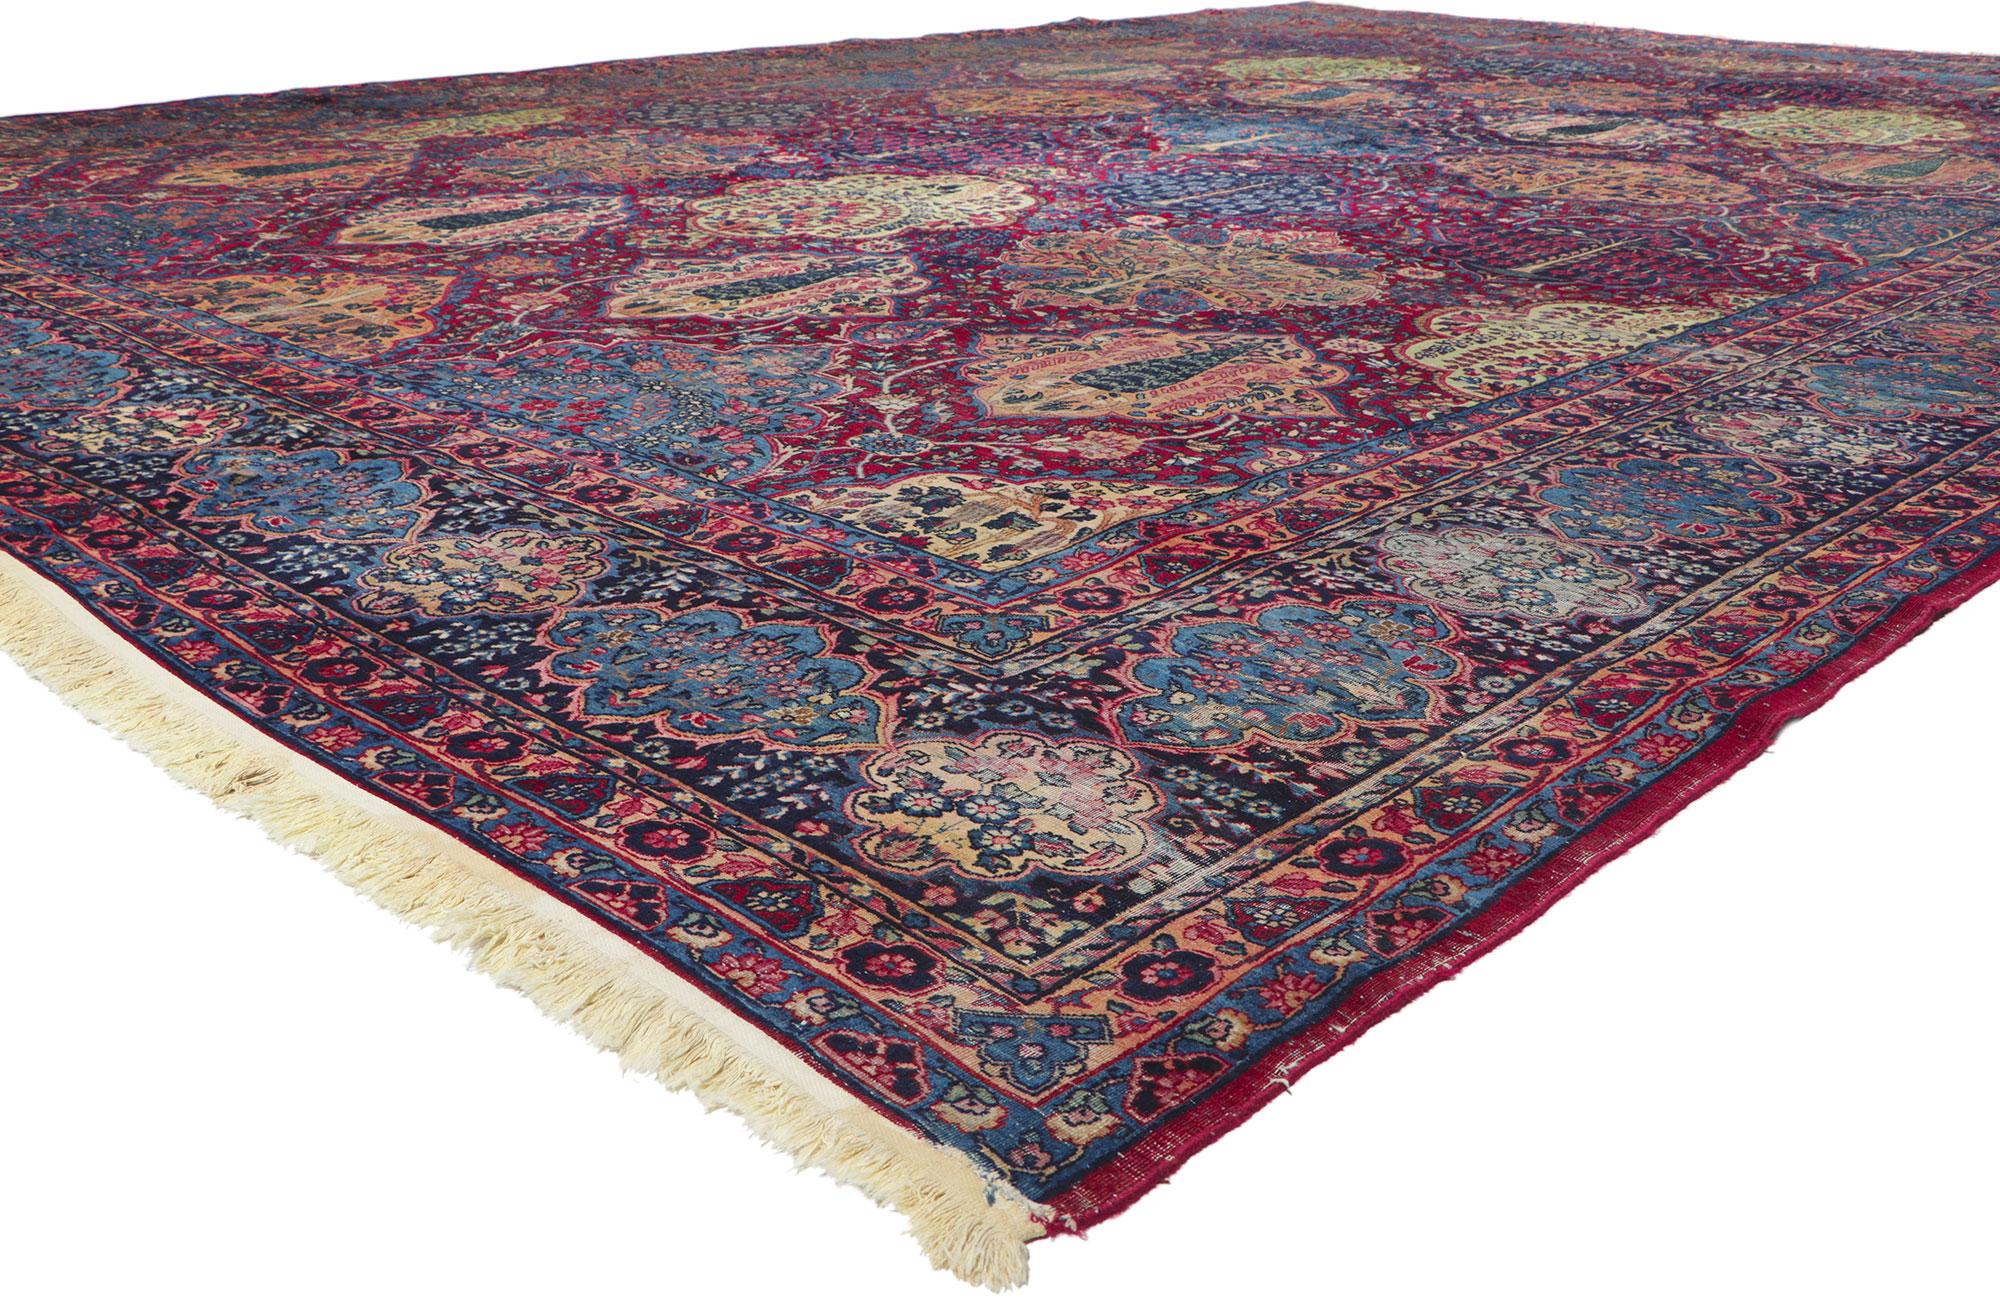 78356 Antique Persian Yazd Rug, 13'02 x 18'07. With timeless appeal, ornate decorative detailing, and effortless beauty, this hand knotted wool antique Persian Yazd rug is poised to impress. The deep red-burgundy field is covered in an all-over